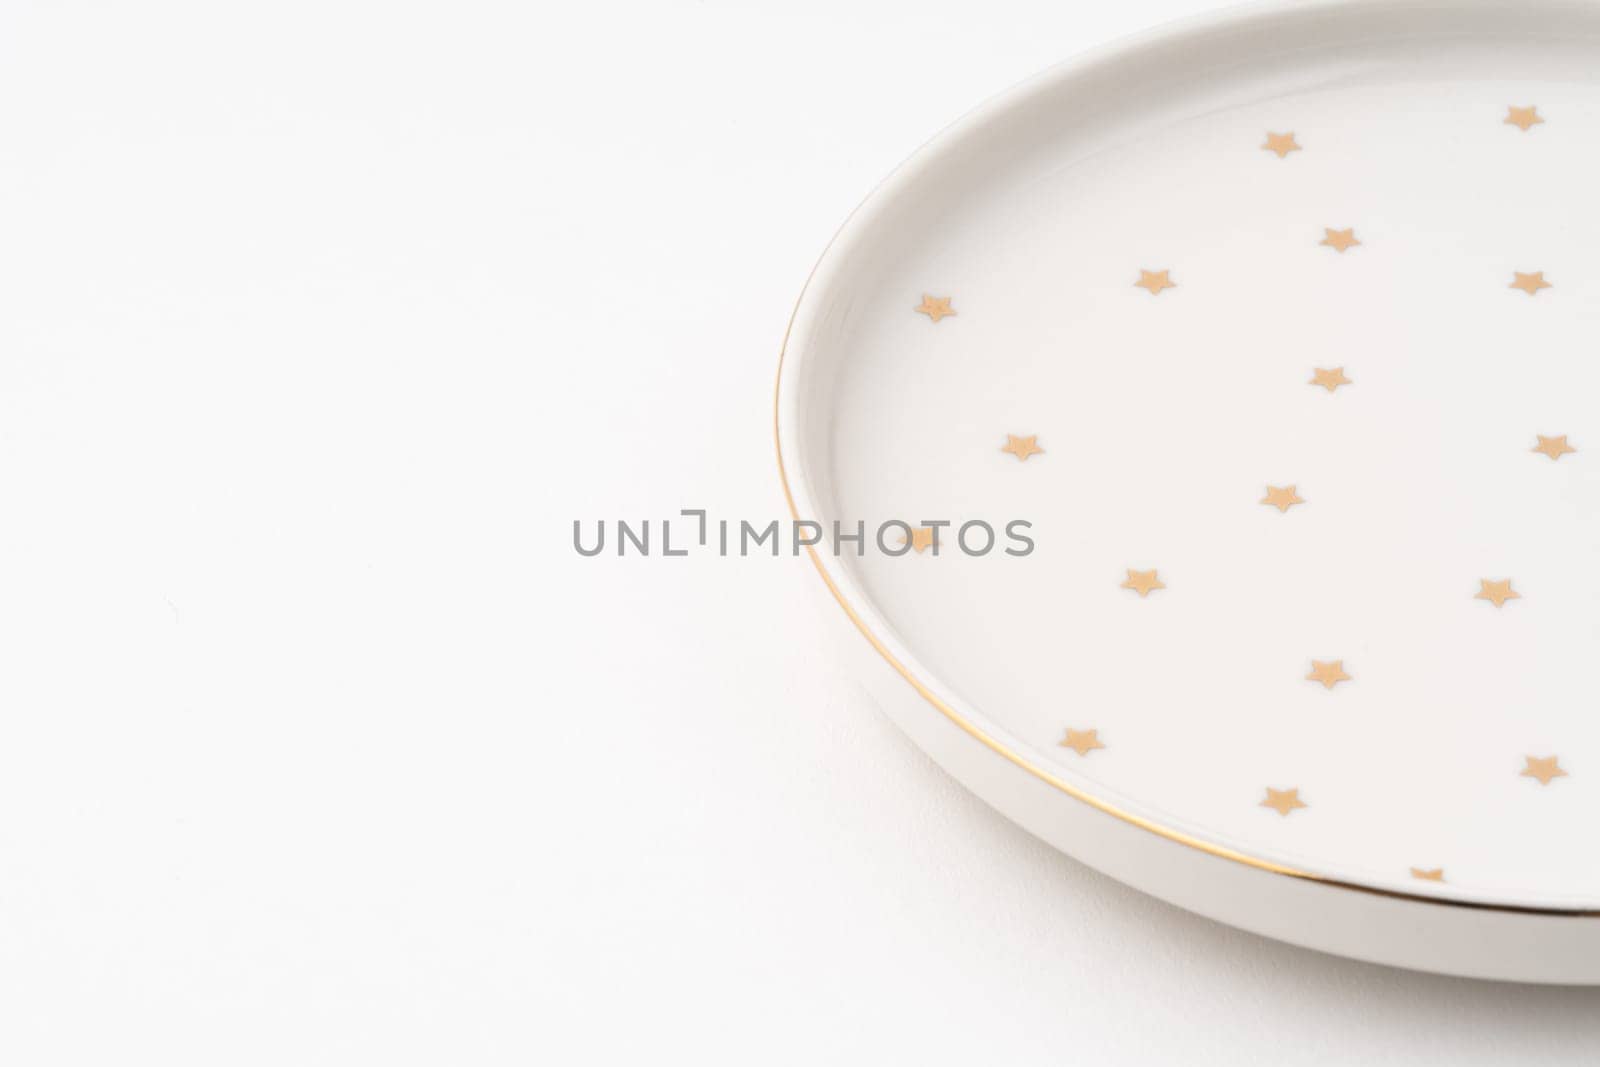 The one ceramic plate isolated on white background